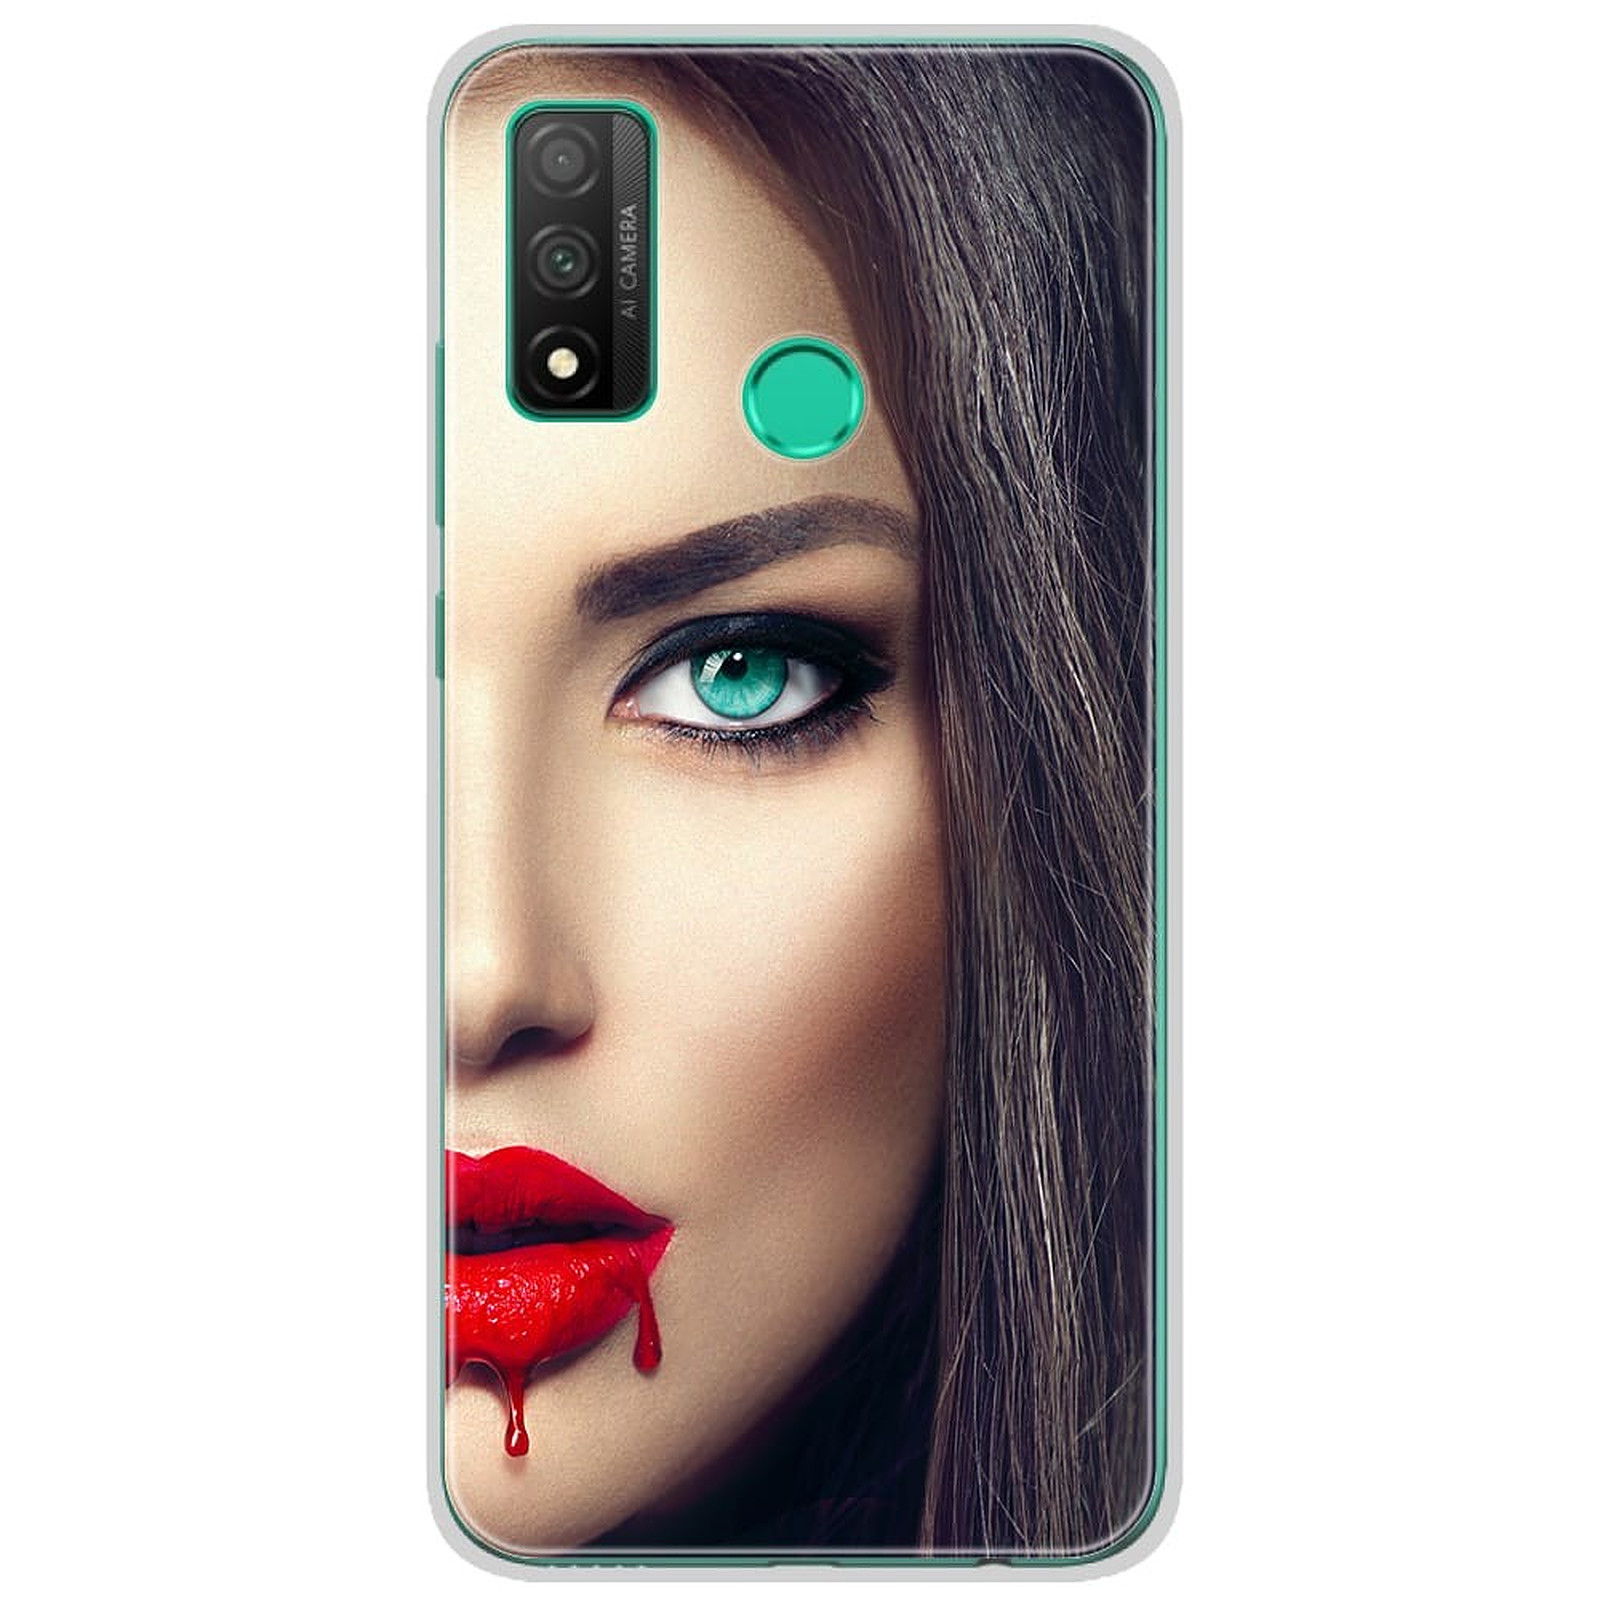 1001 Coques Coque silicone gel Huawei P Smart 2020 motif Lèvres Sang - Coque telephone 1001Coques